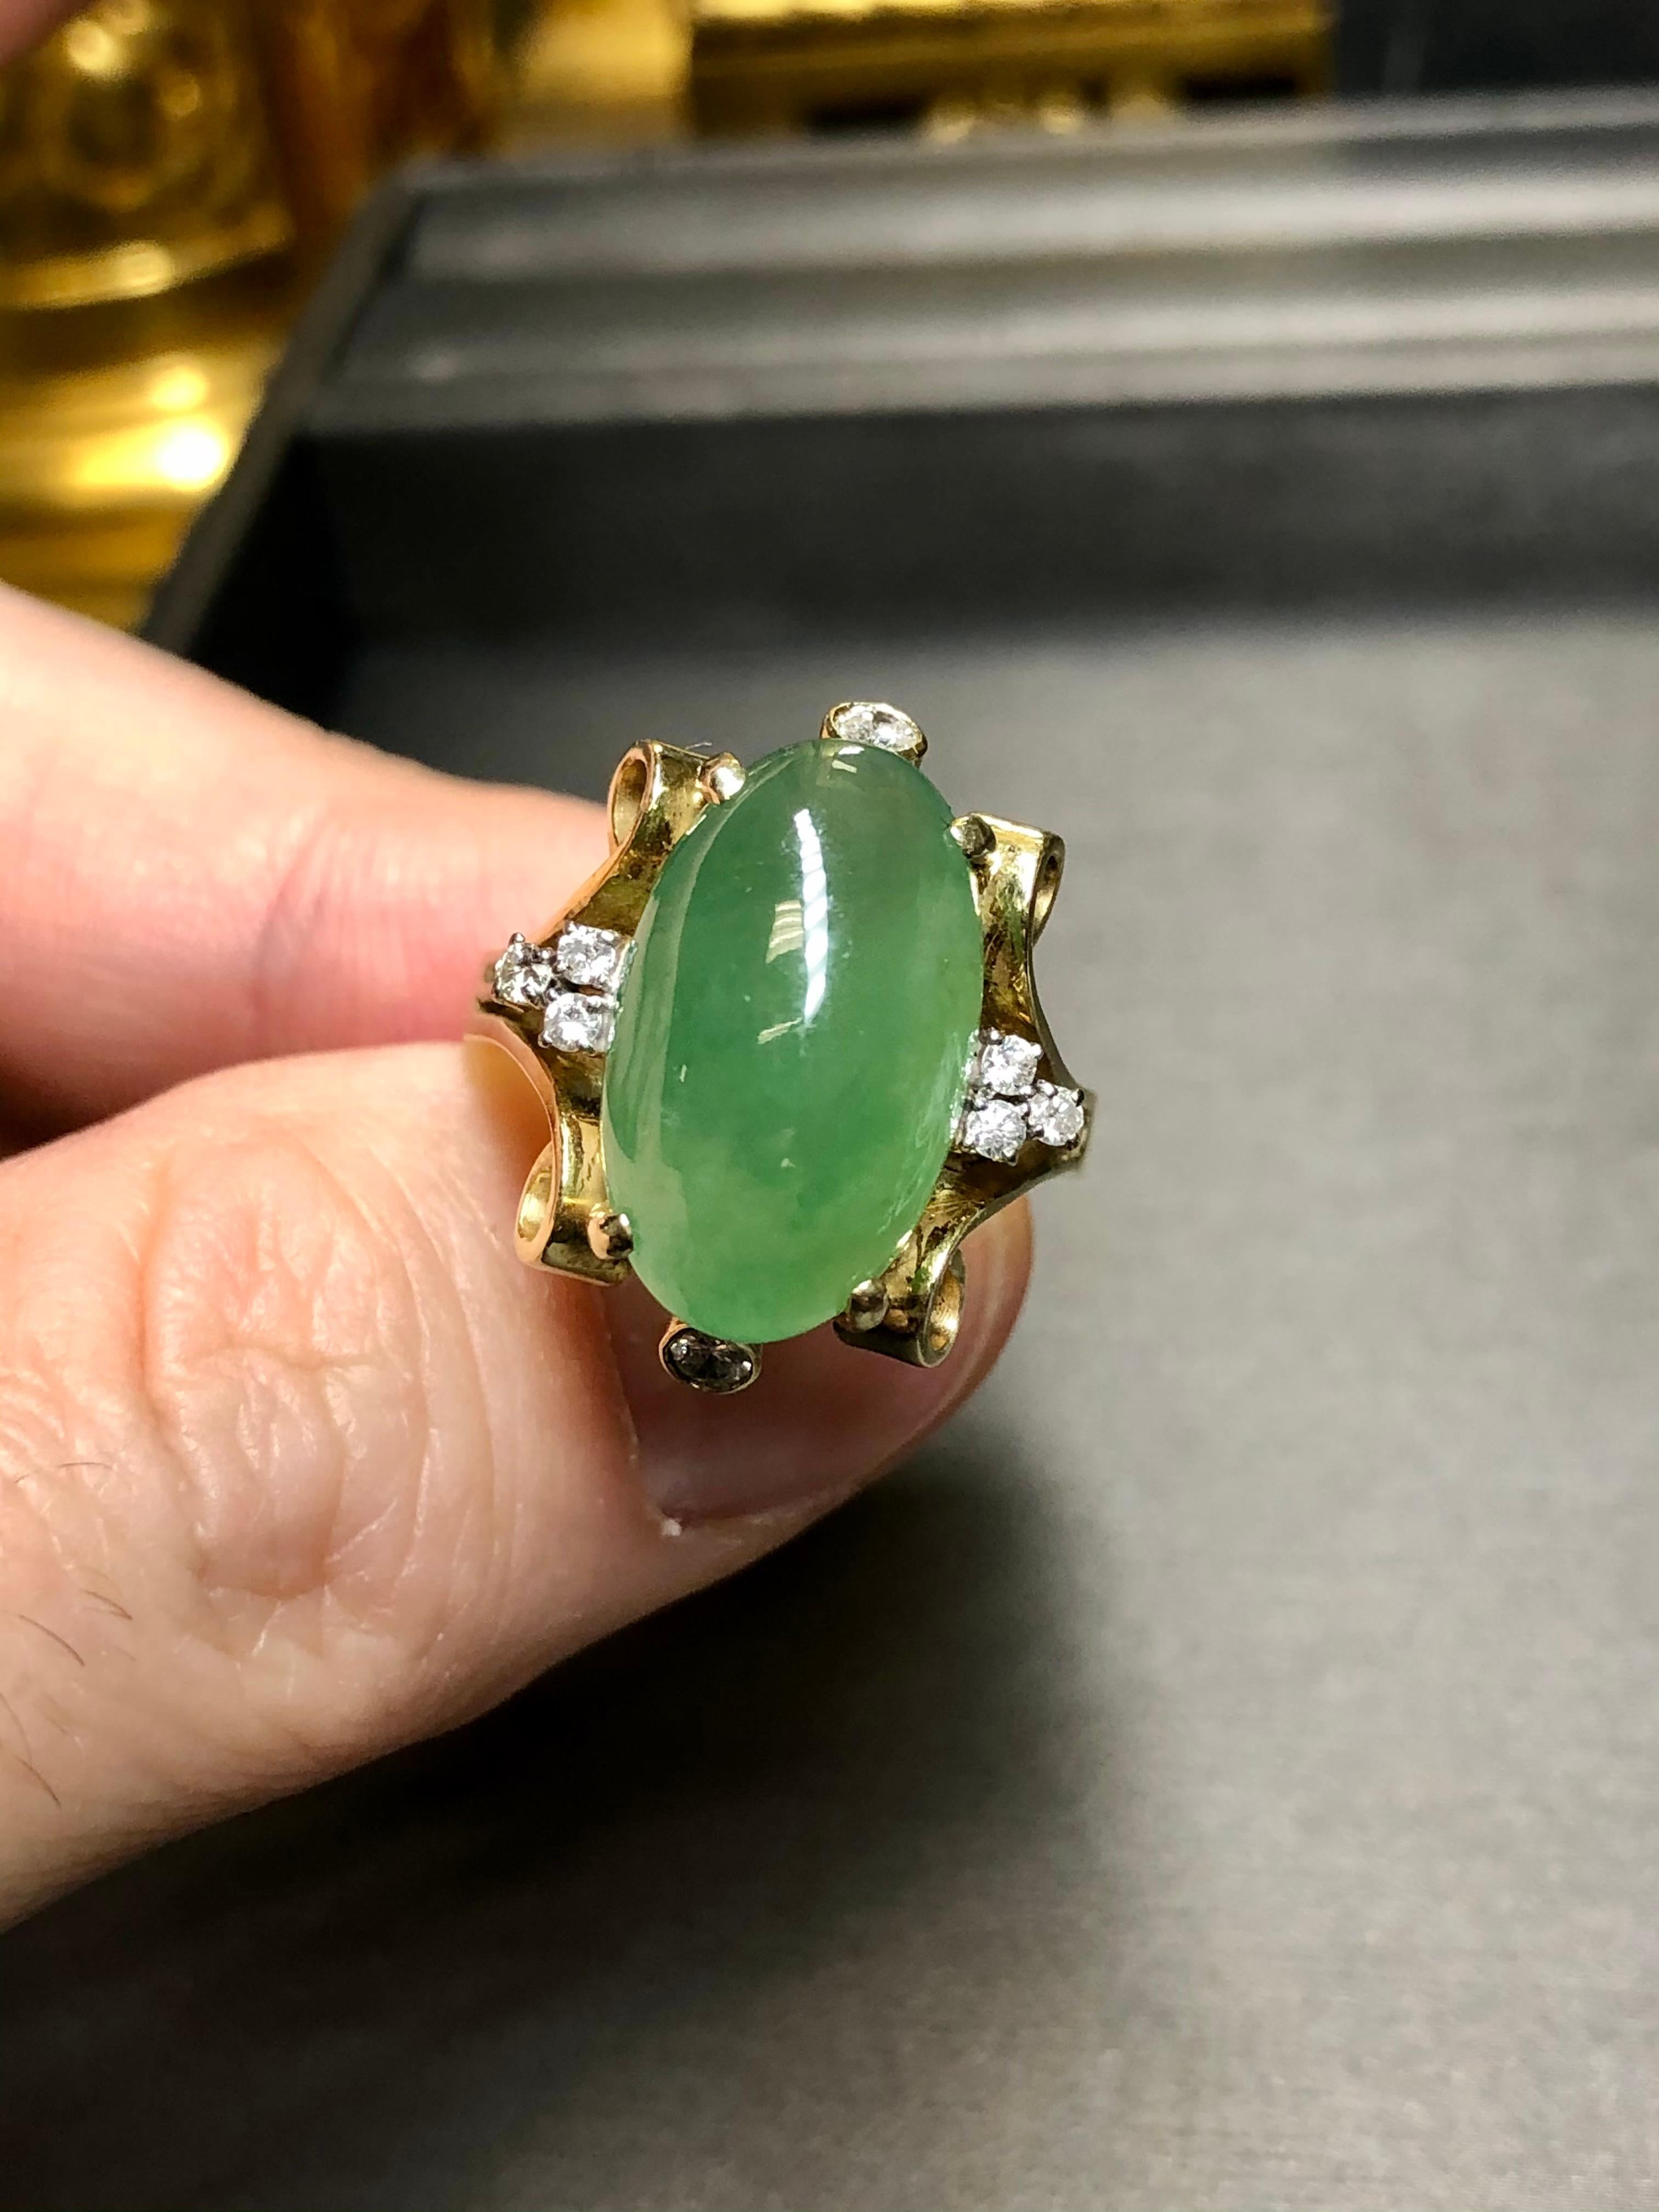 An impressive vintage ring done in 14K yellow gold and centered by an approximately 17ct jade cabochon (17.51mm x 10.65mm x 7.3mm) along with approximately .28cttw in H-J color Si1-2 clarity round diamonds.


Dimensions/Weight:

Ring measures .90”